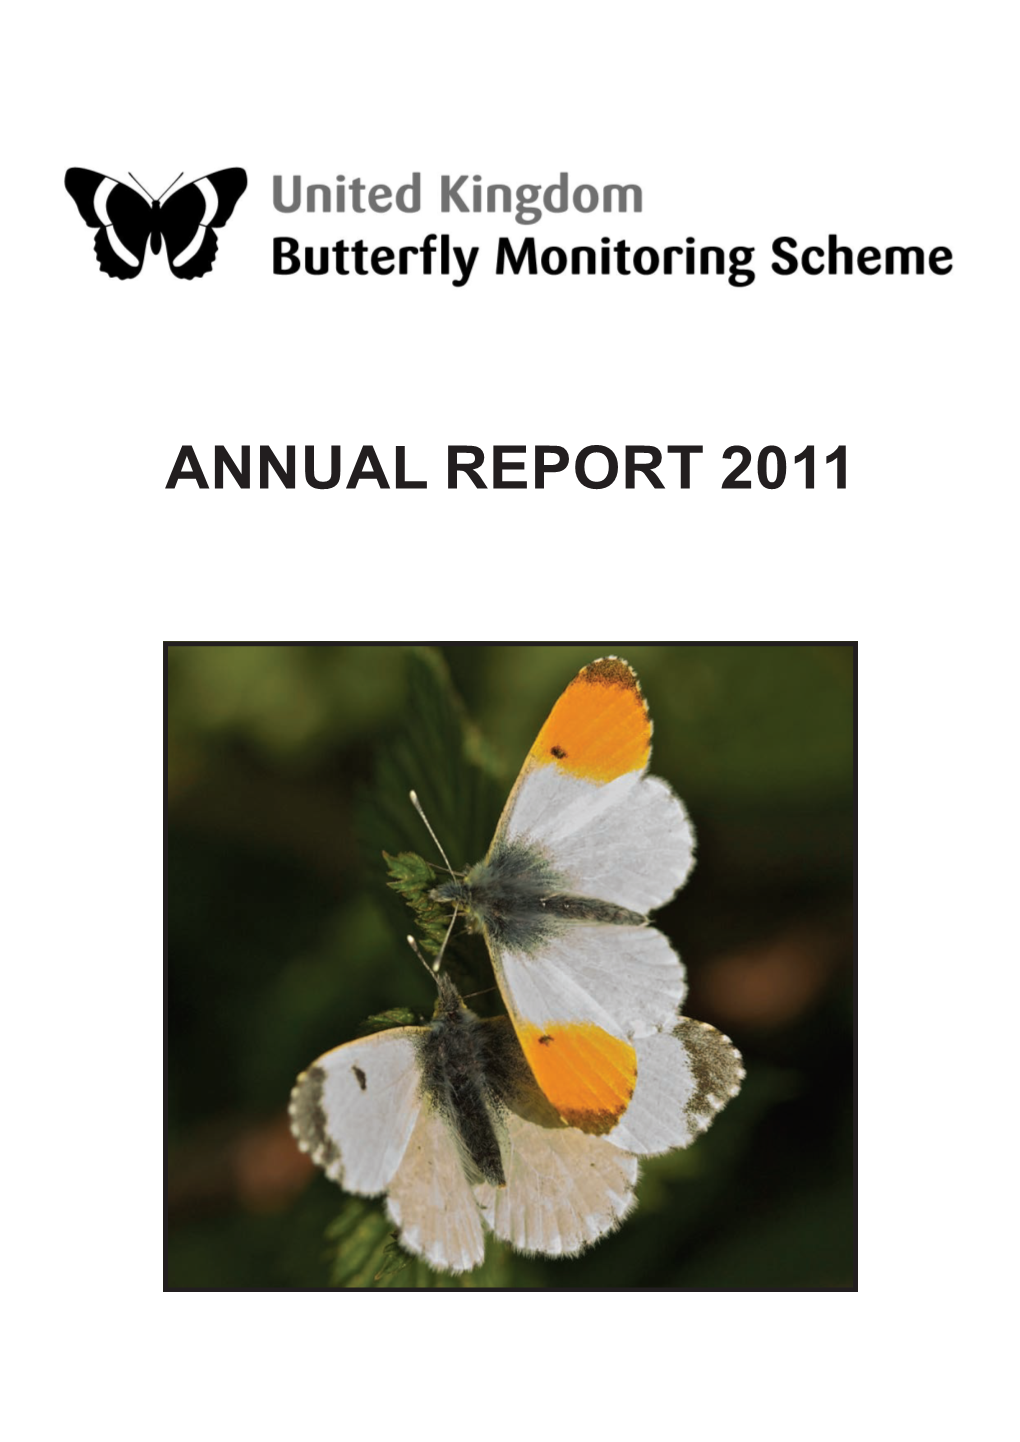 ANNUAL REPORT 2011 Tracking Changes in the Abundance of UK Butterflies